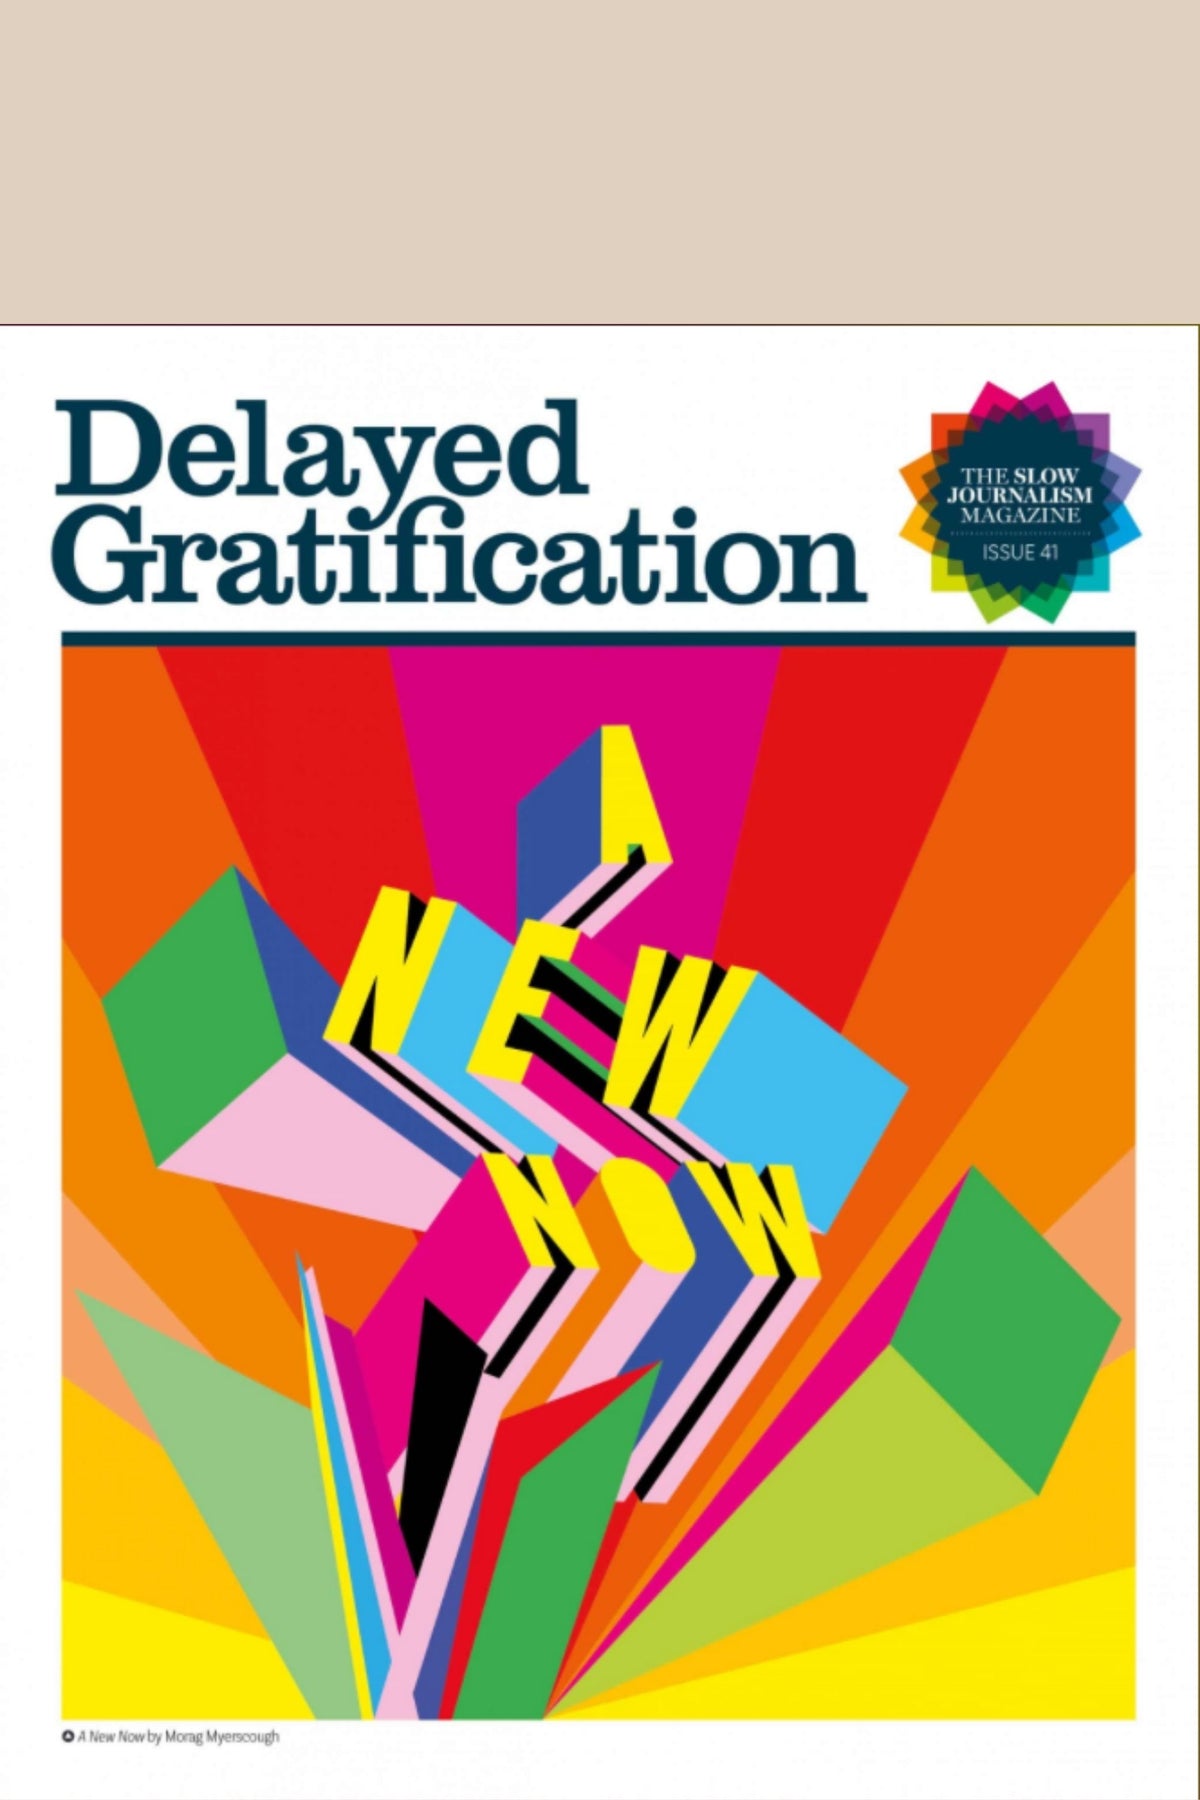 Delayed Gratification Issue 41 Front cover &#39;A new now&#39;